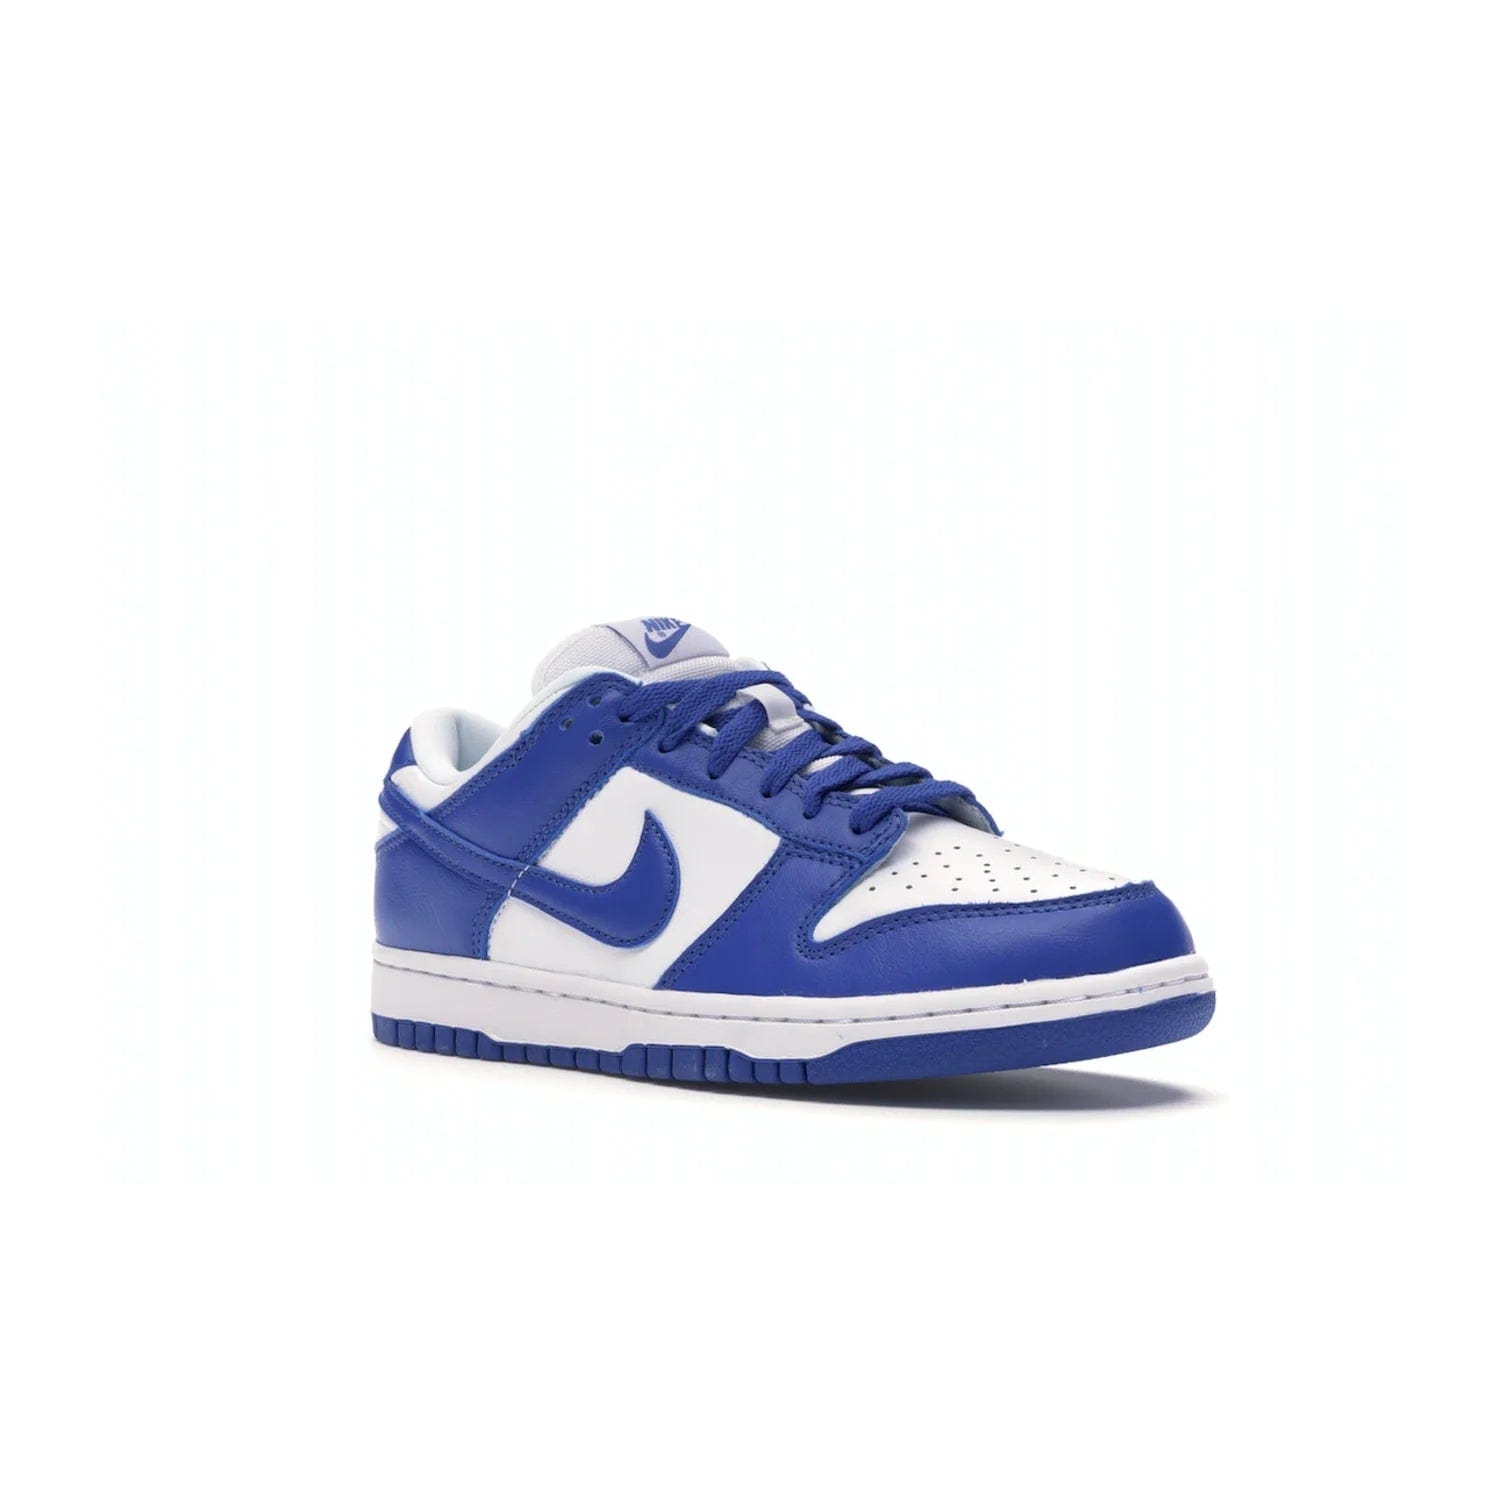 Nike Dunk Low SP Kentucky (2020/2022) - Image 5 - Only at www.BallersClubKickz.com - Classic Nike Dunk Low SP Kentucky with timeless White/Varsity Royal colorway. White leather upper, royal outsole, and Nike branding. A hit since March 2020 homage to the 1985 Nike College Colors program. Show your support with these classic kicks.